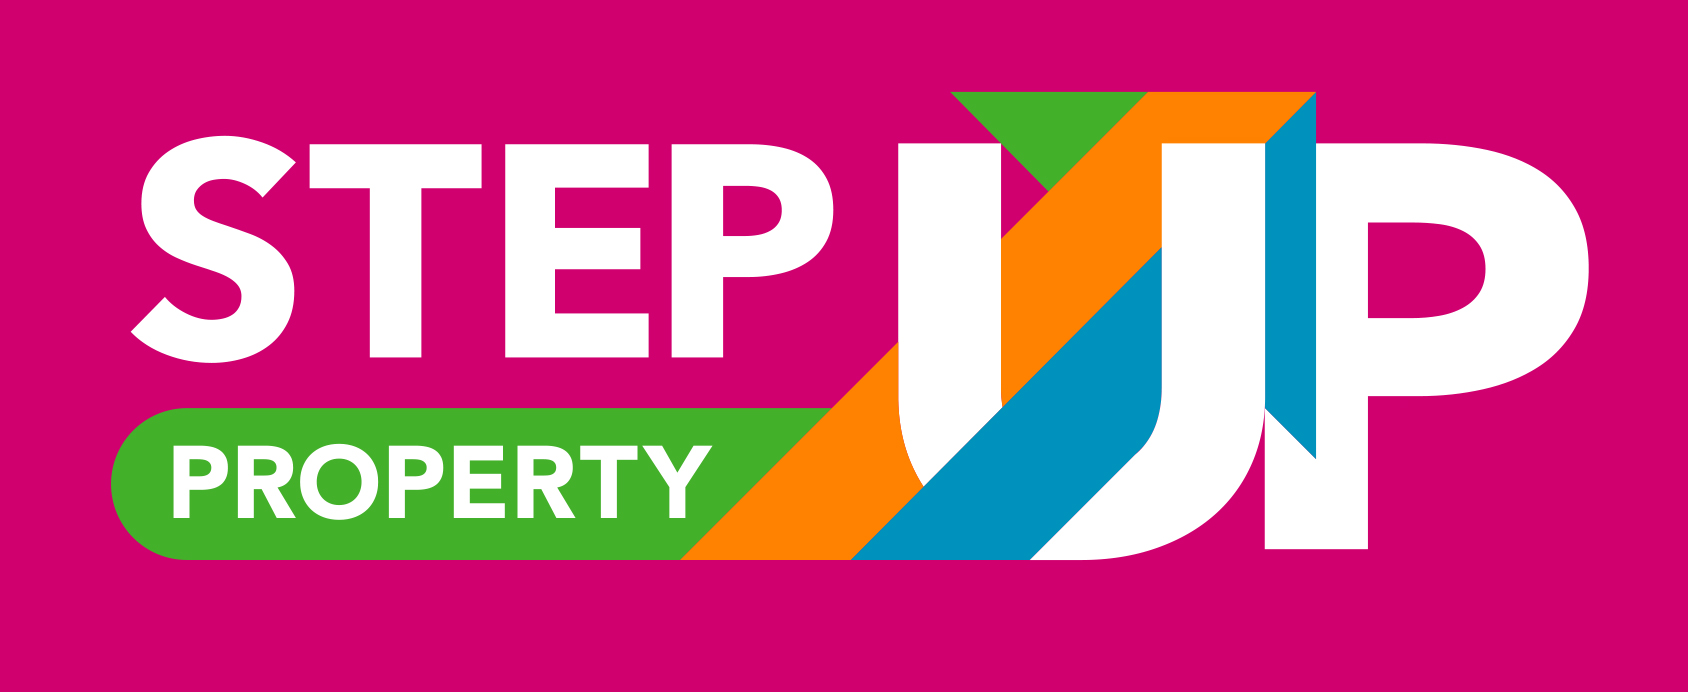 Real Estate Agency Step Up Property